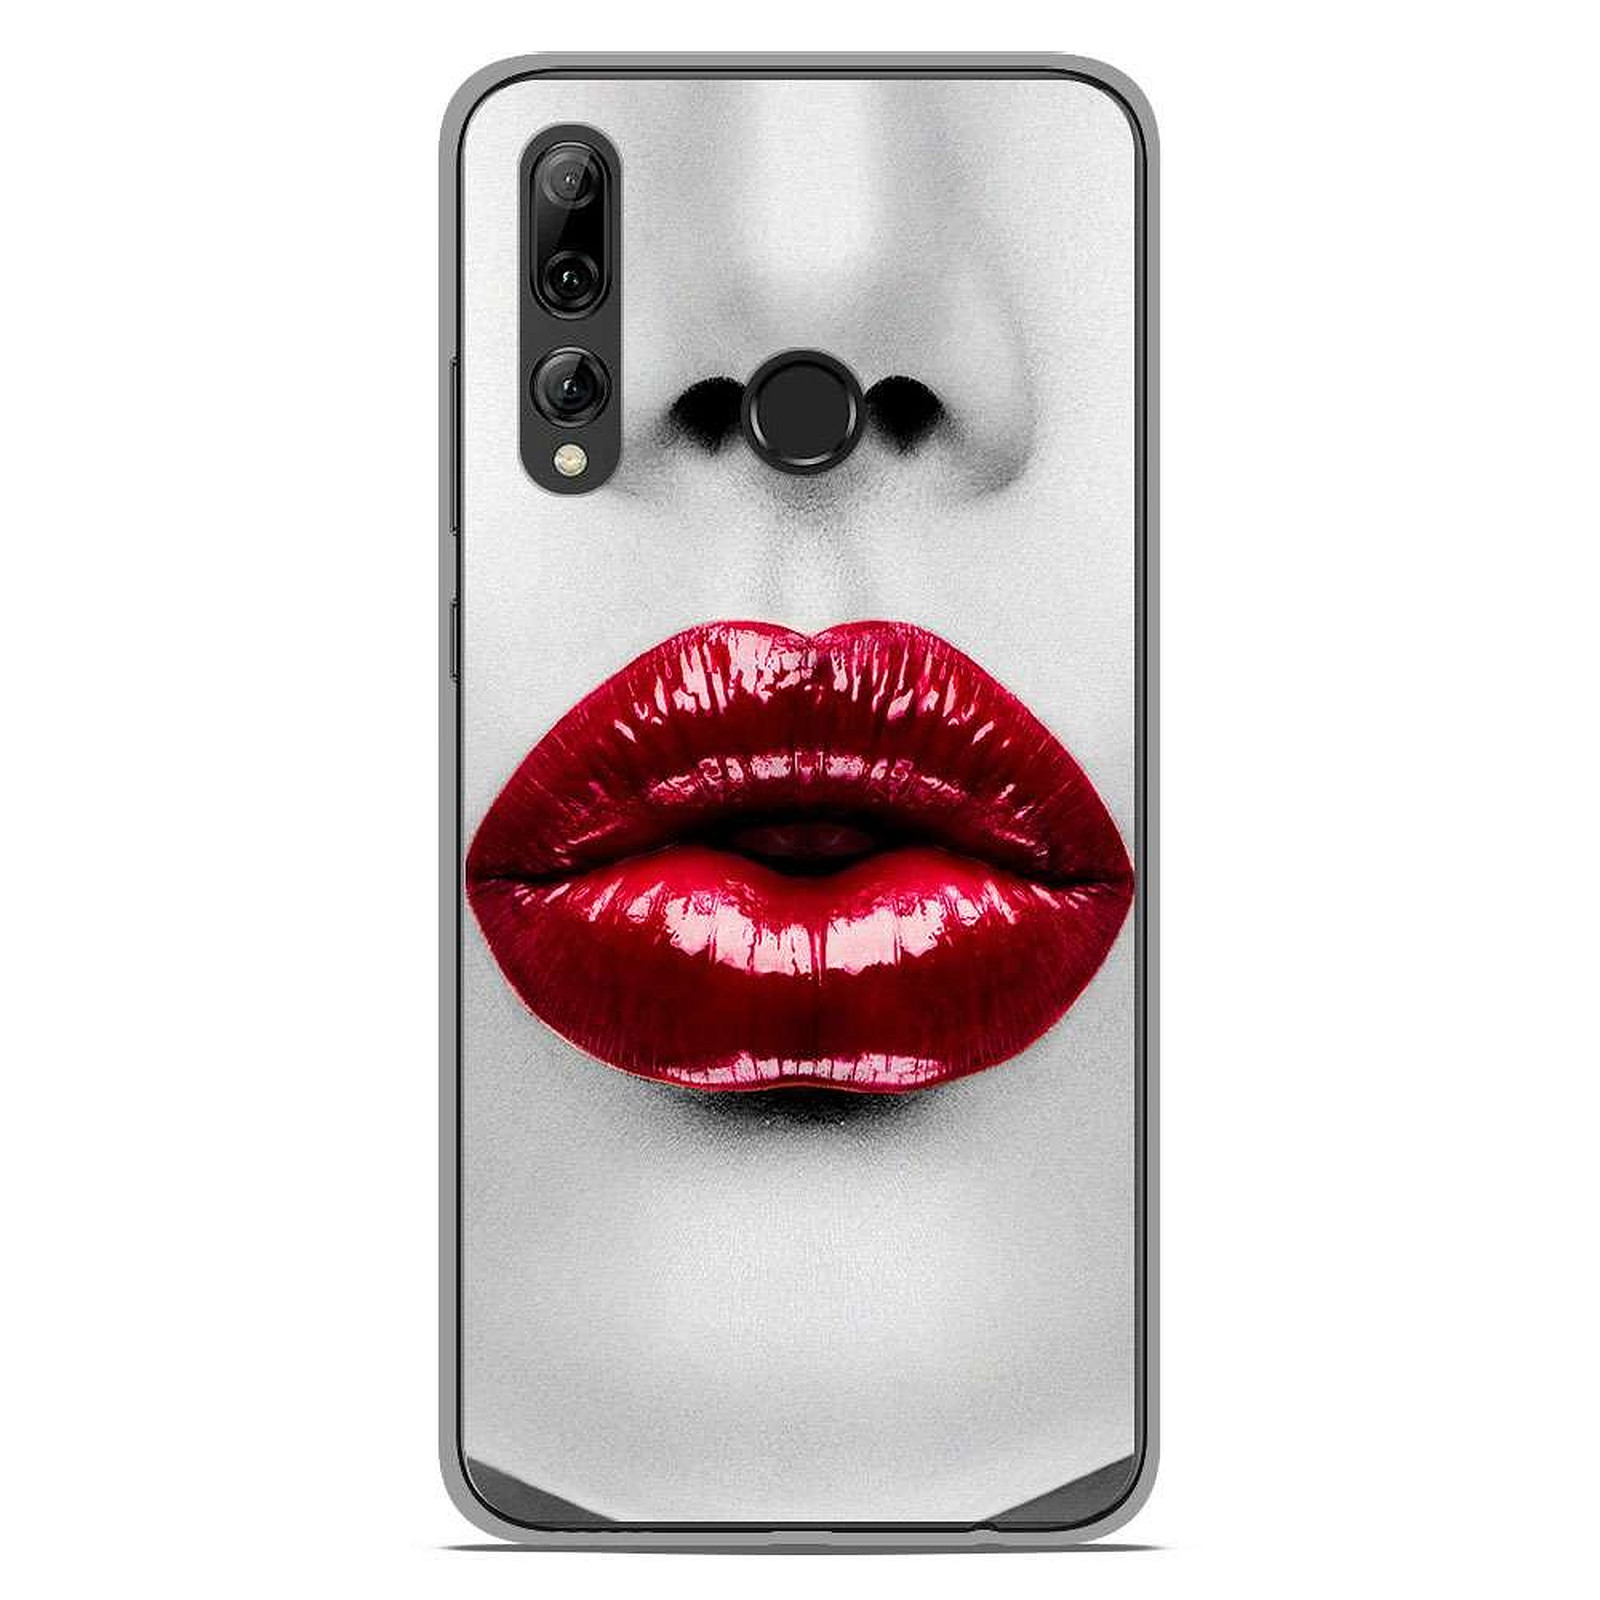 1001 Coques Coque silicone gel Huawei P Smart Plus 2019 motif Lèvres Rouges - Coque telephone 1001Coques